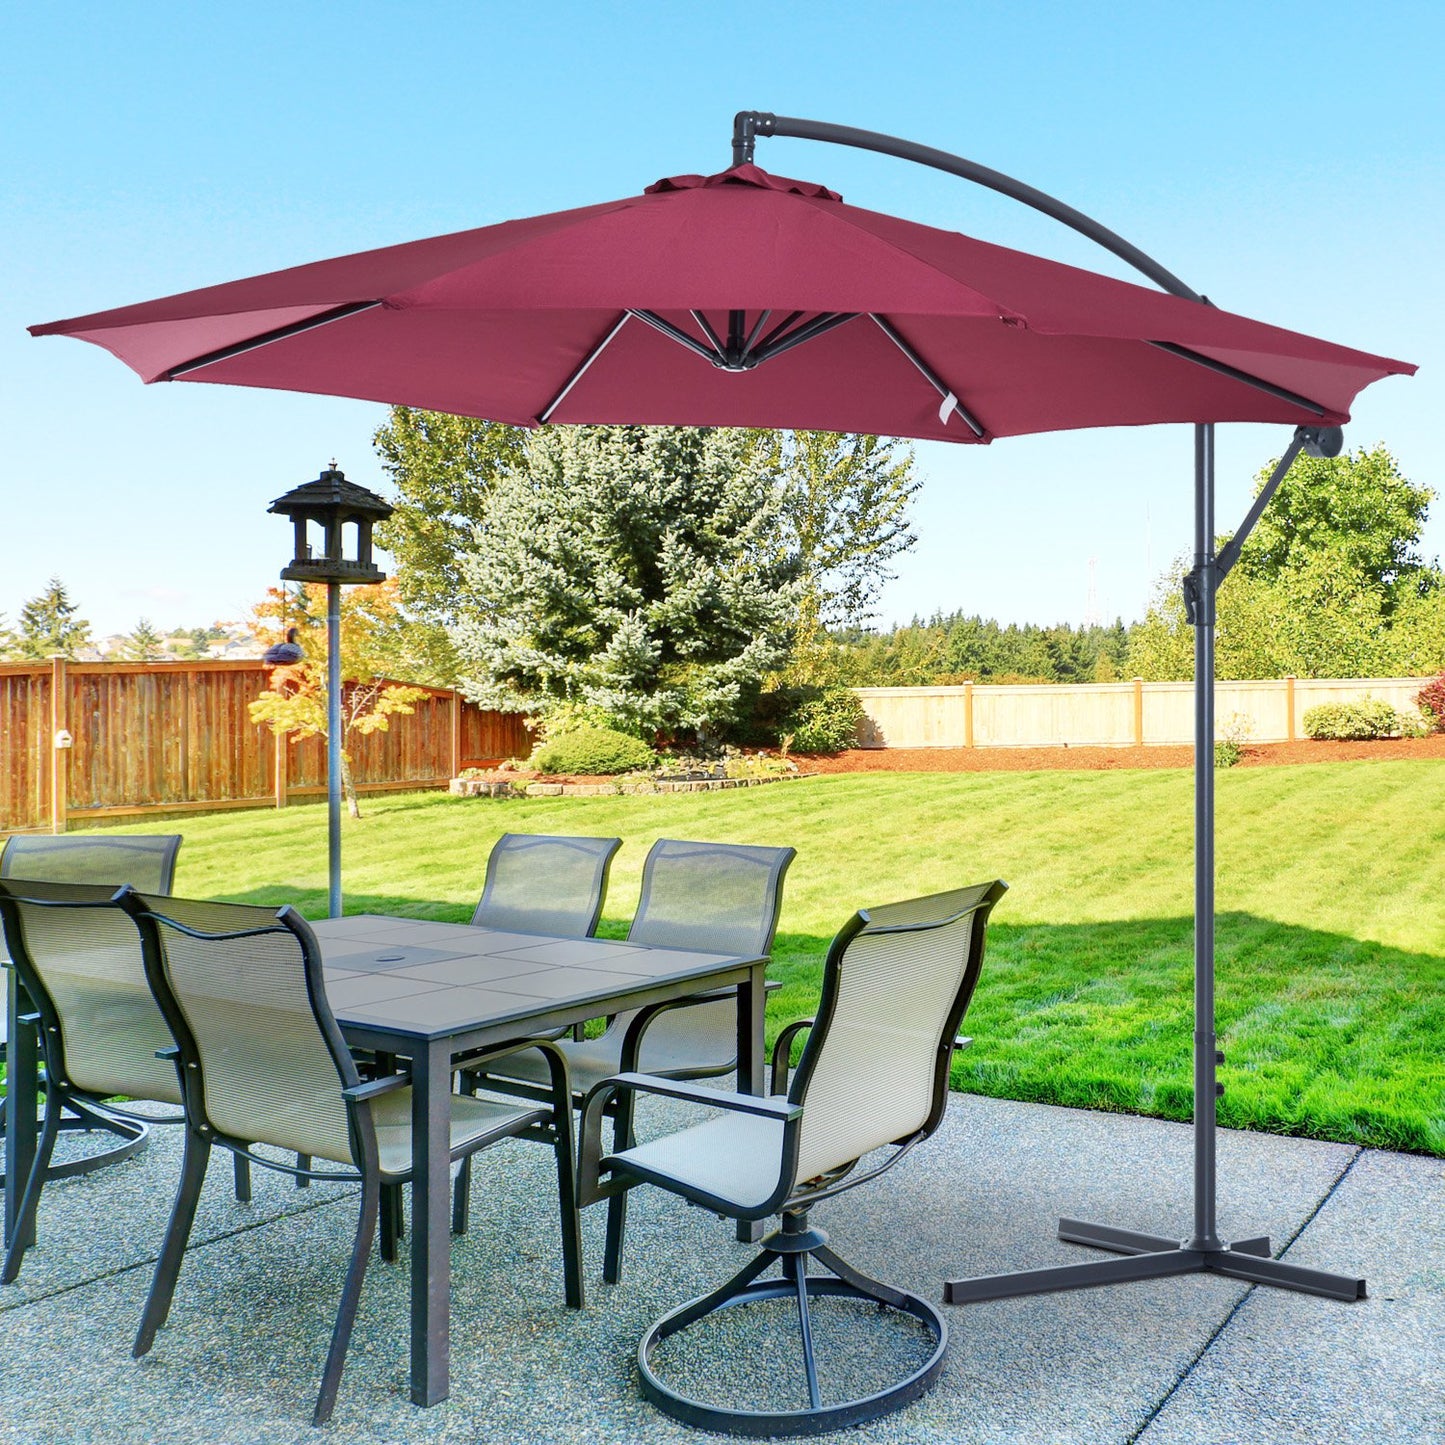 Outsunny 3m Water Resistant Terylene Hanging Parasol Wine Red